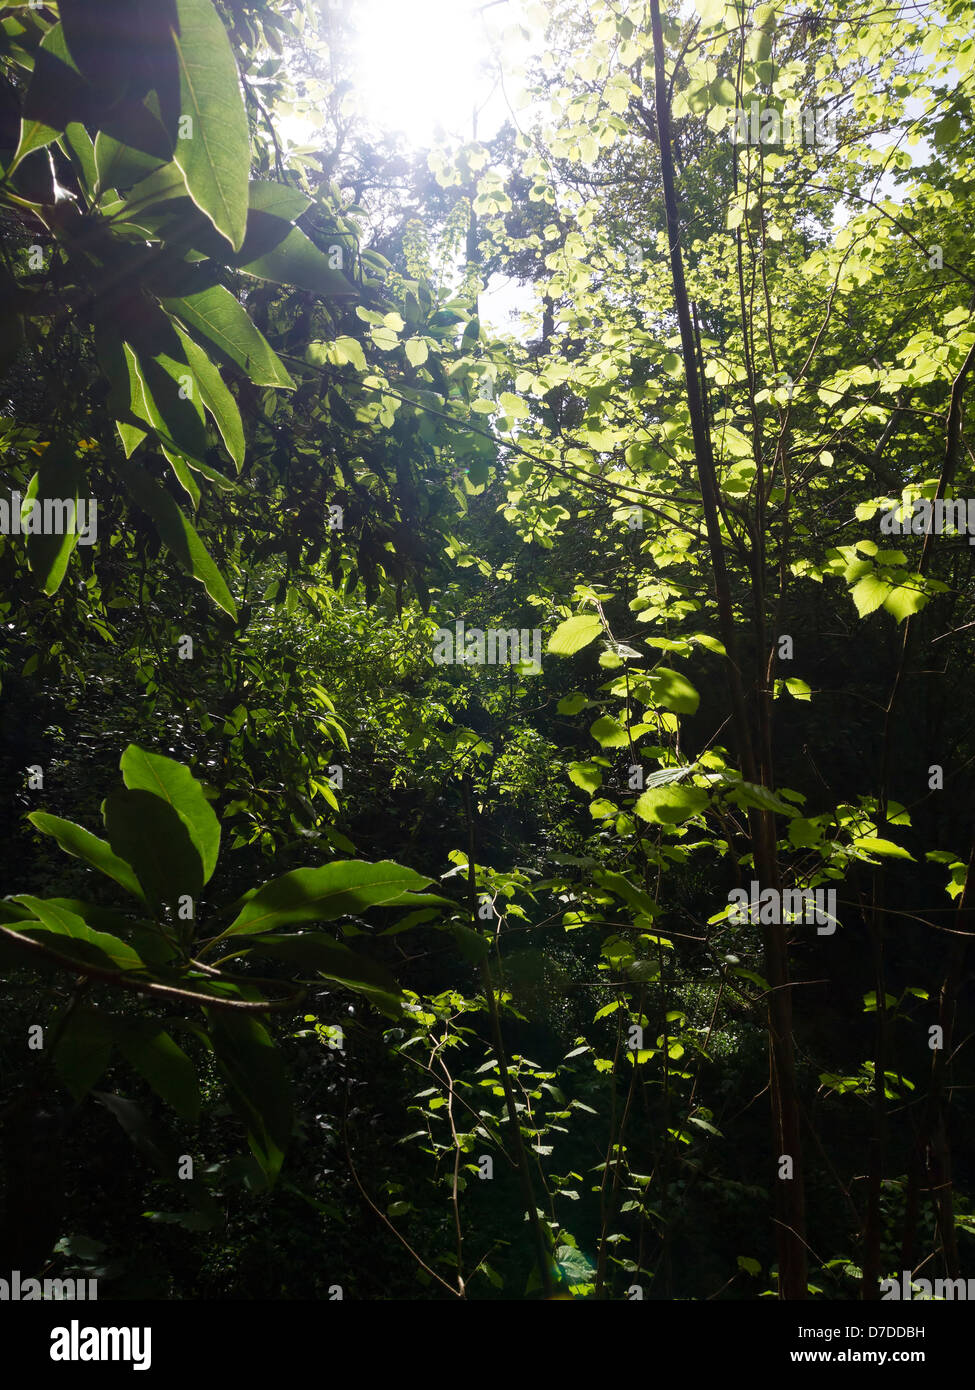 Thick vegetation in a forest Stock Photo